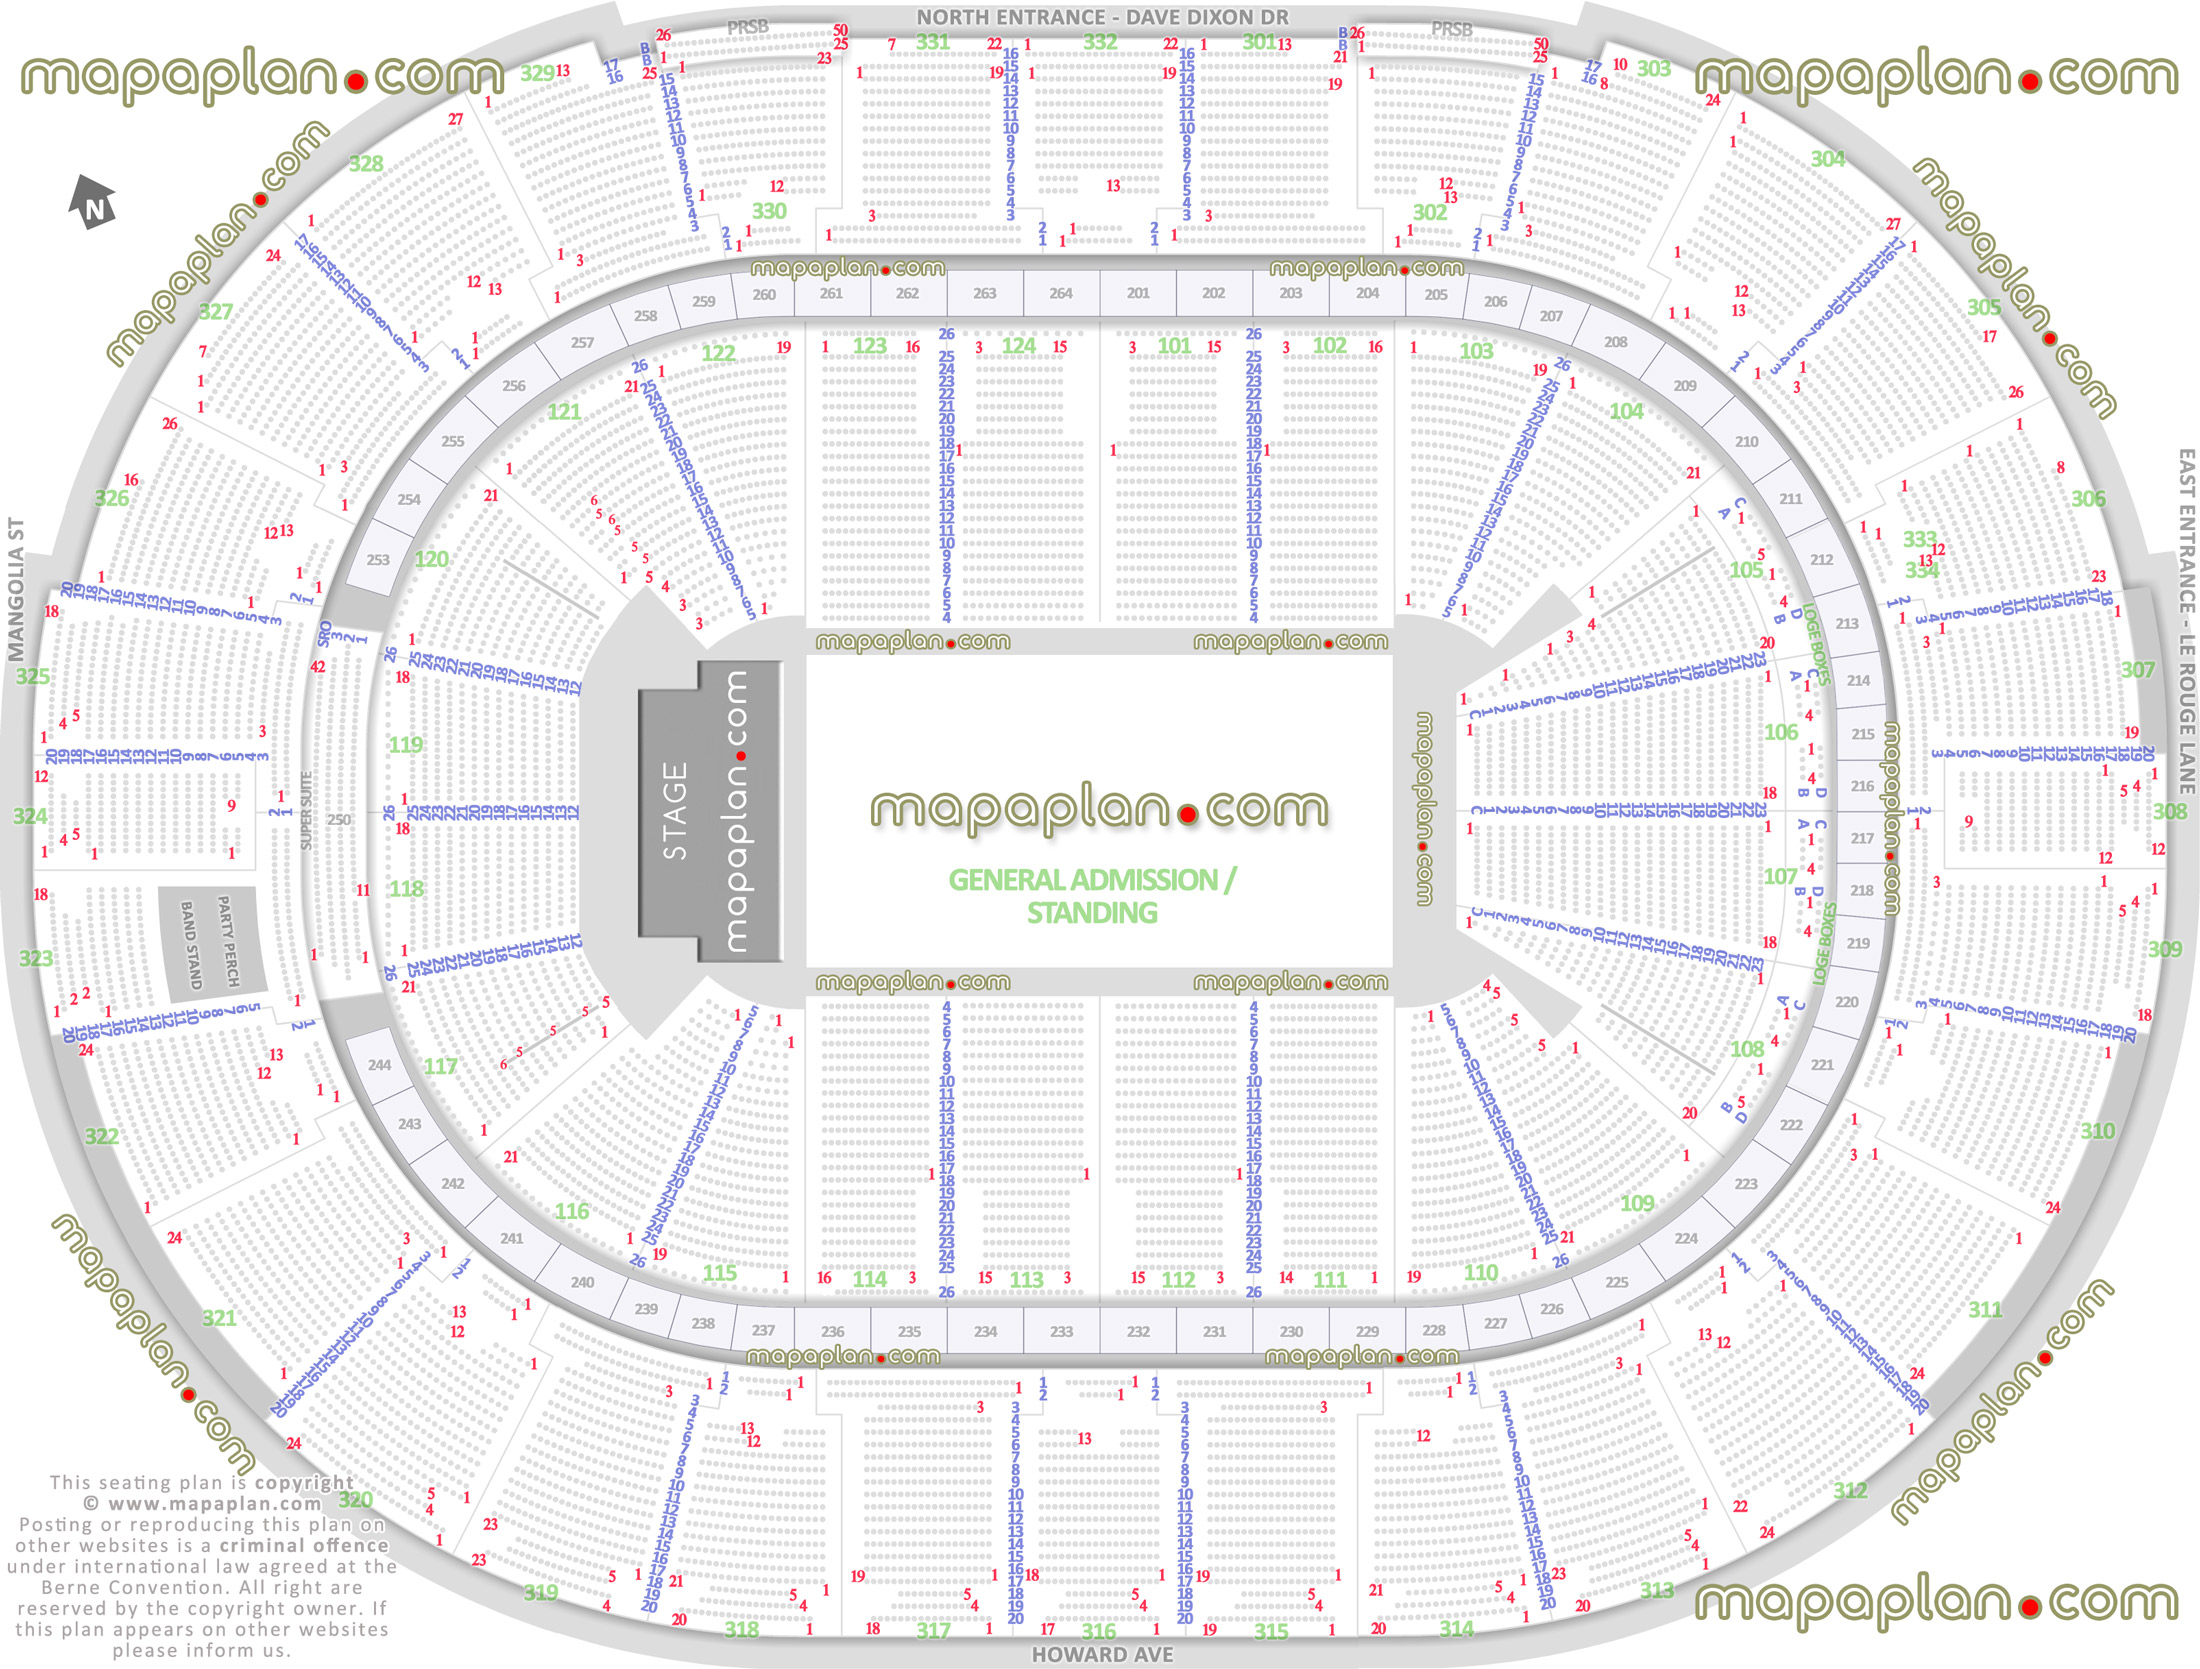 general admission ga floor standing concert capacity 3d plan smoothie king center arena la concert stage detailed floor pit sections best seat numbers selection information guide virtual interactive image map rows 1 2 3 4 5 6 7 8 9 10 11 12 13 14 15 16 17 18 19 20 21 22 23 24 25 26 New Orleans Smoothie King Center arena seating chart